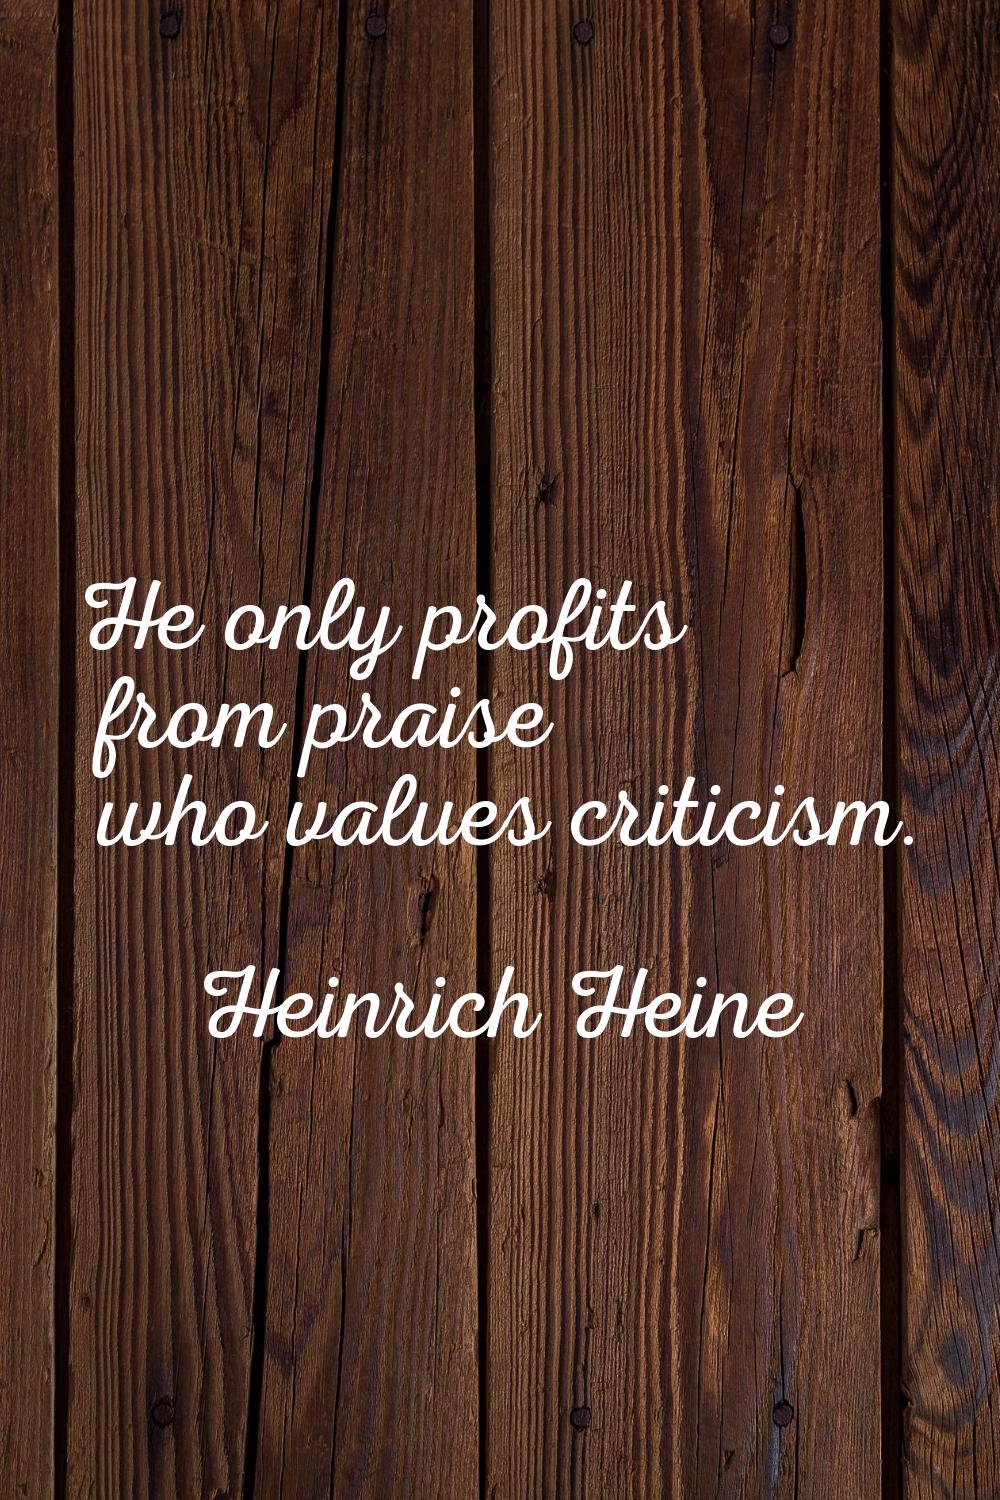 He only profits from praise who values criticism.